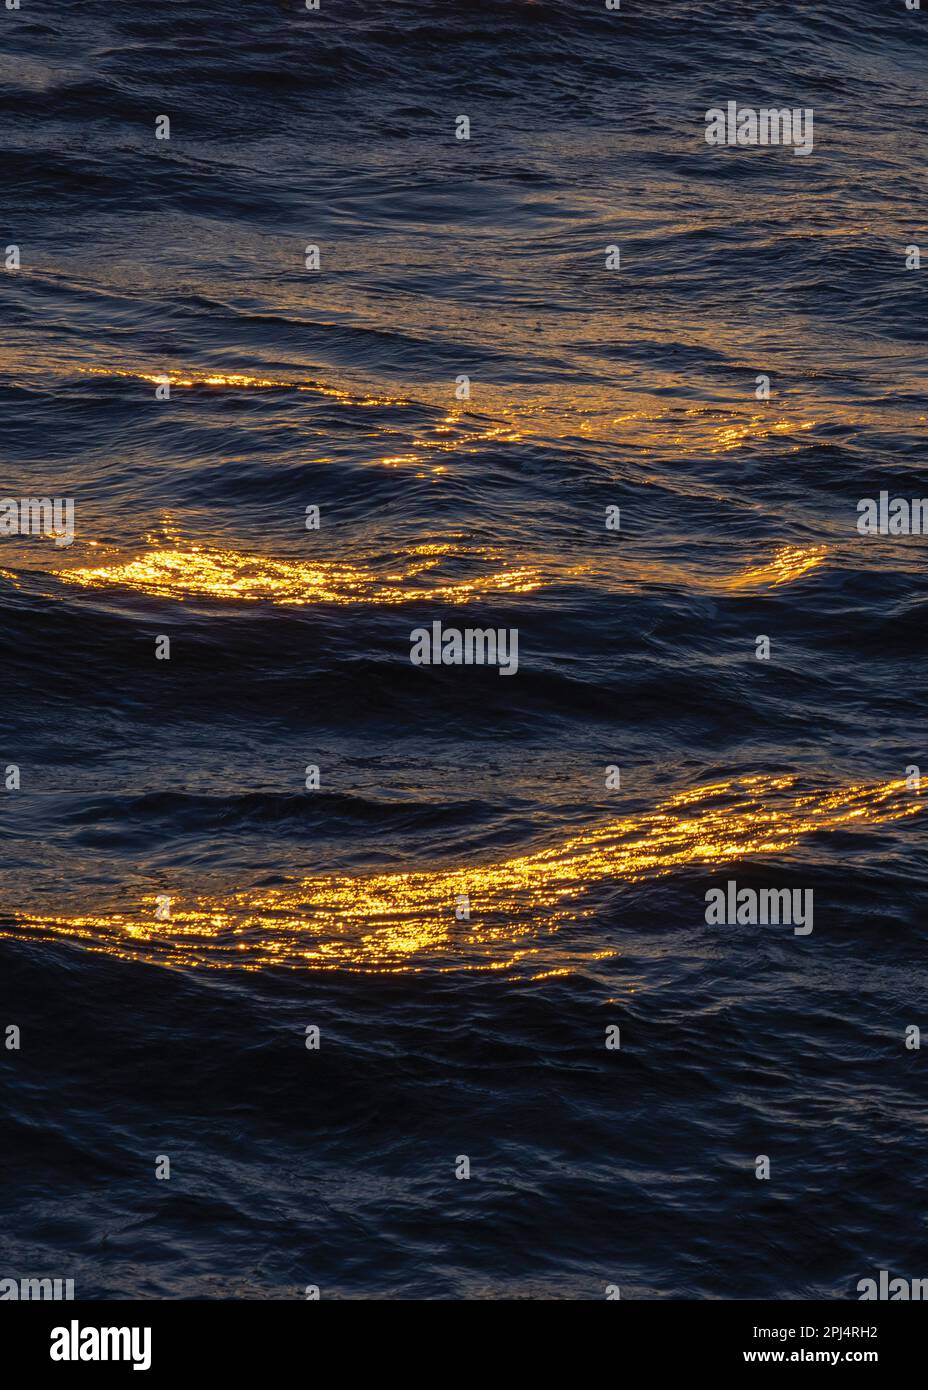 Sunset reflection on waves in sea. Stock Photo